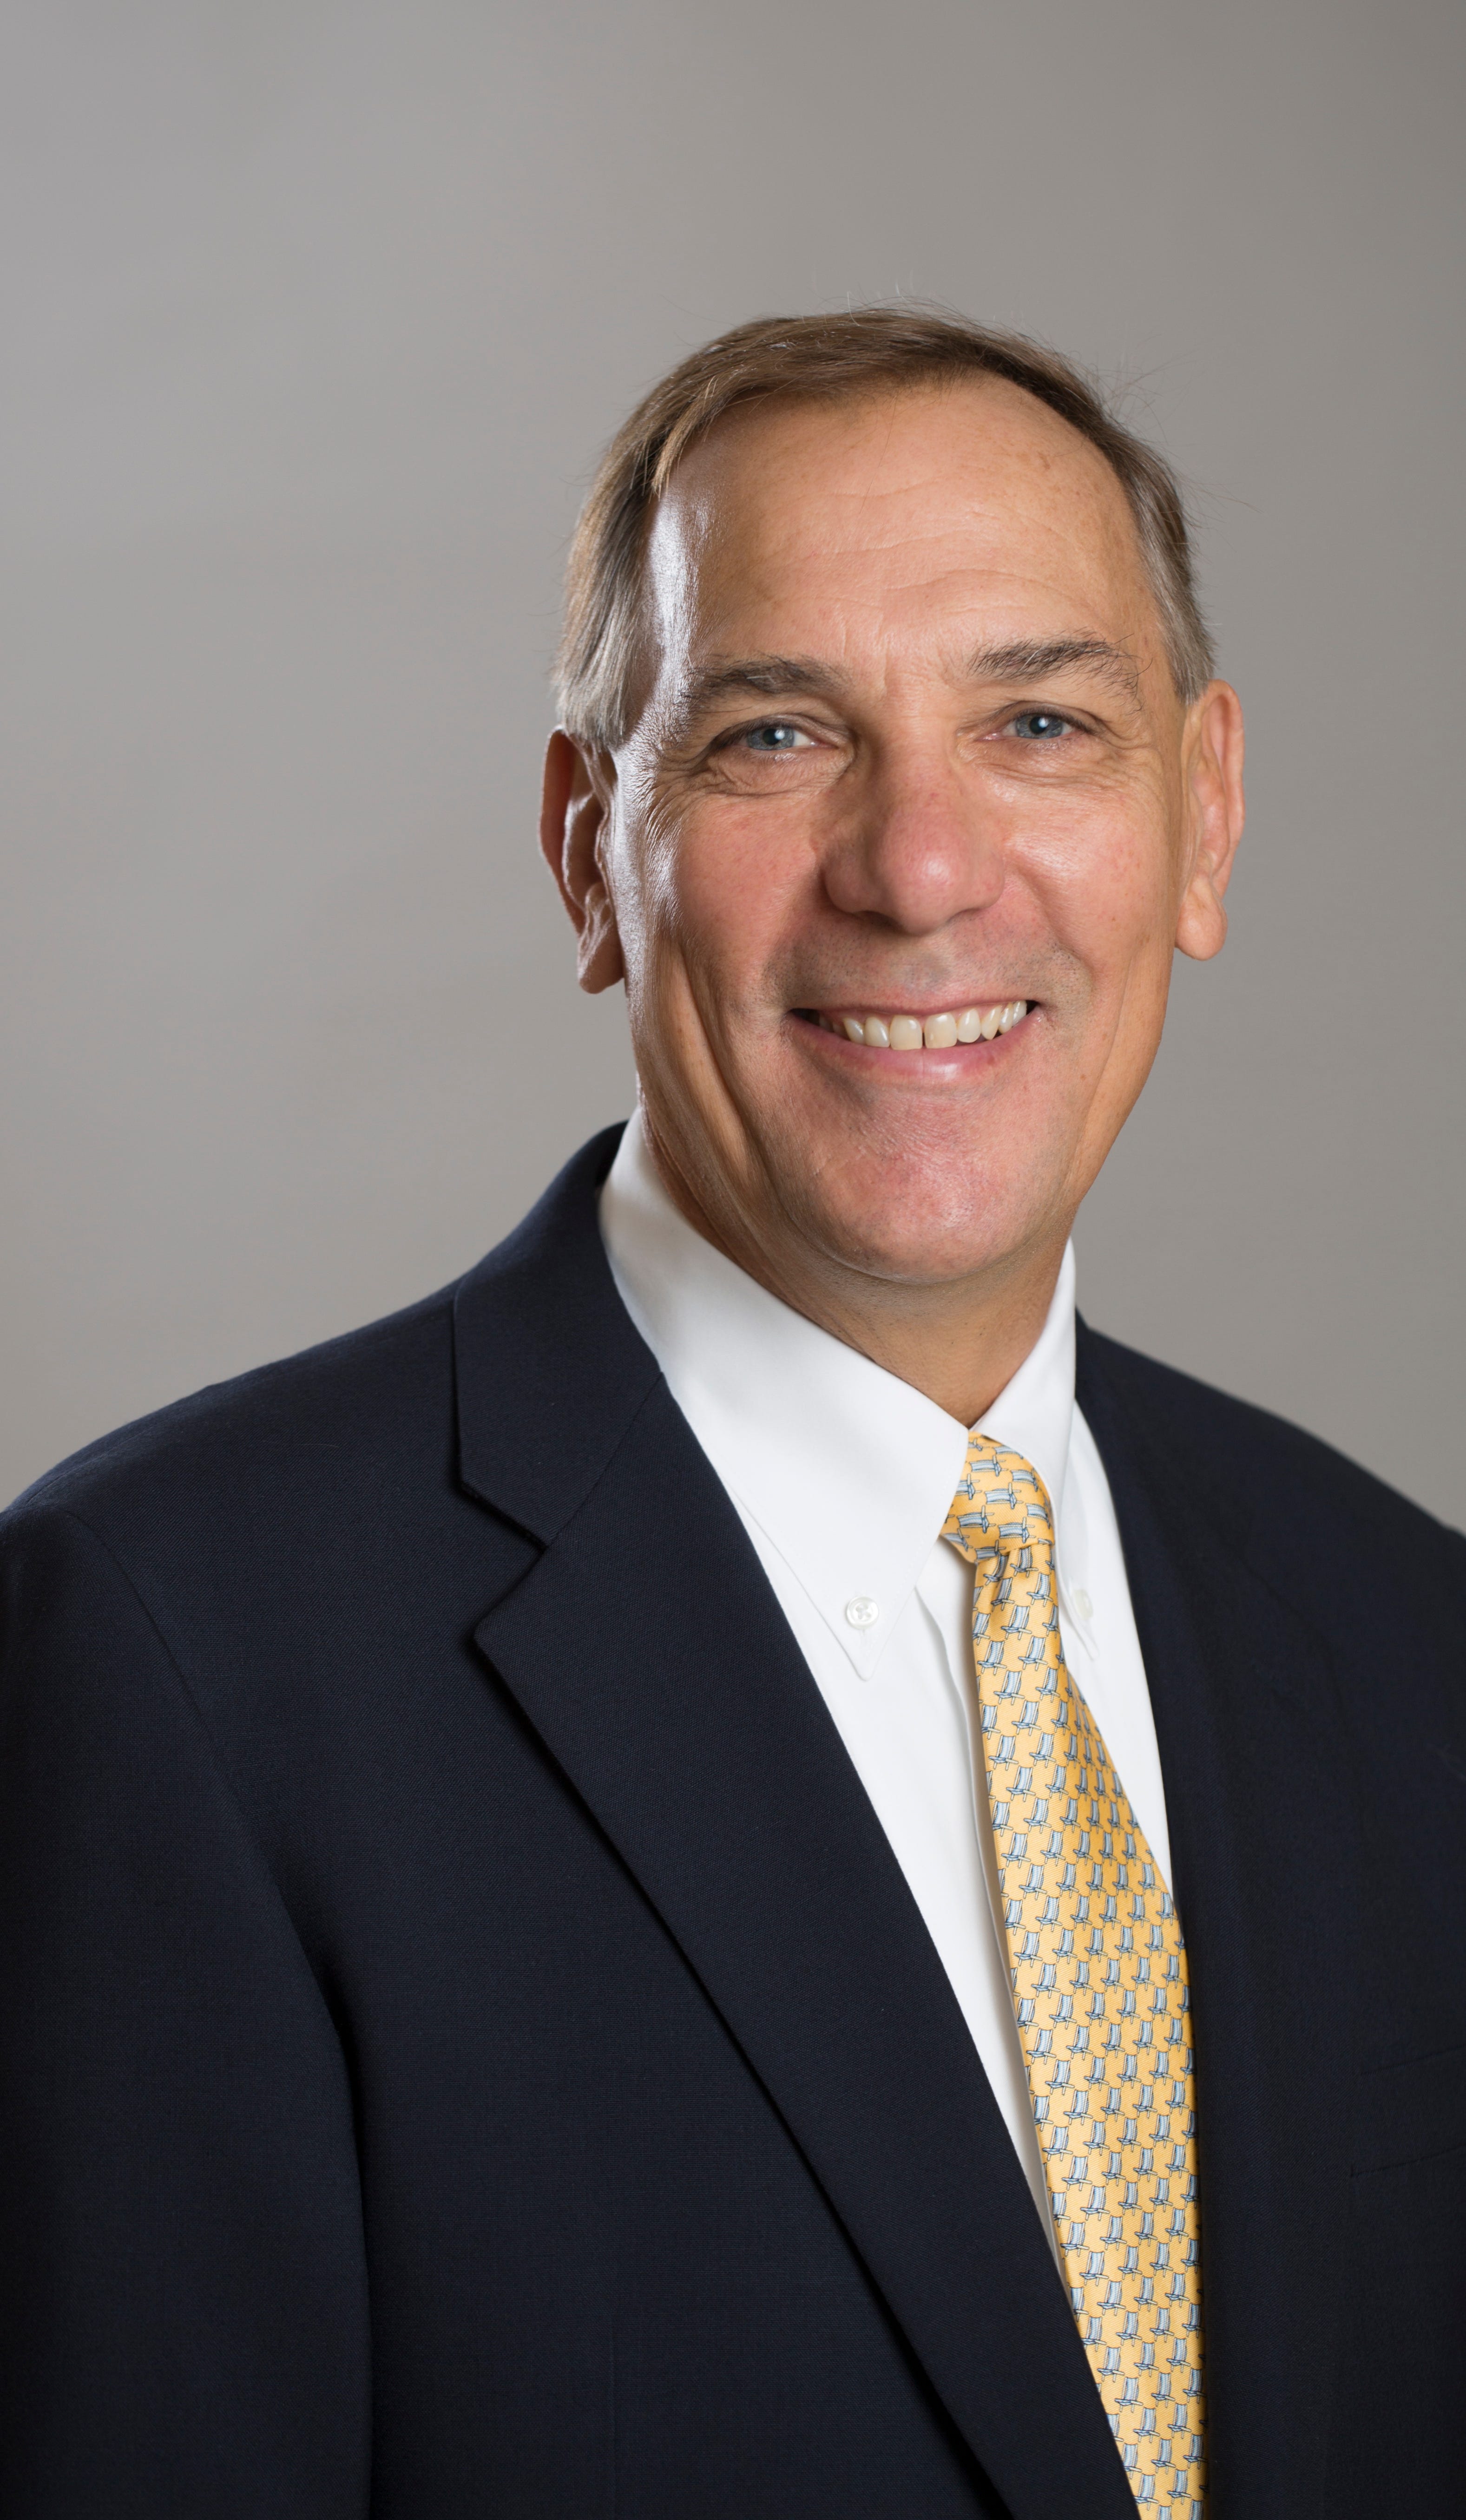 Greg Soehner to retire as president and CEO of East House